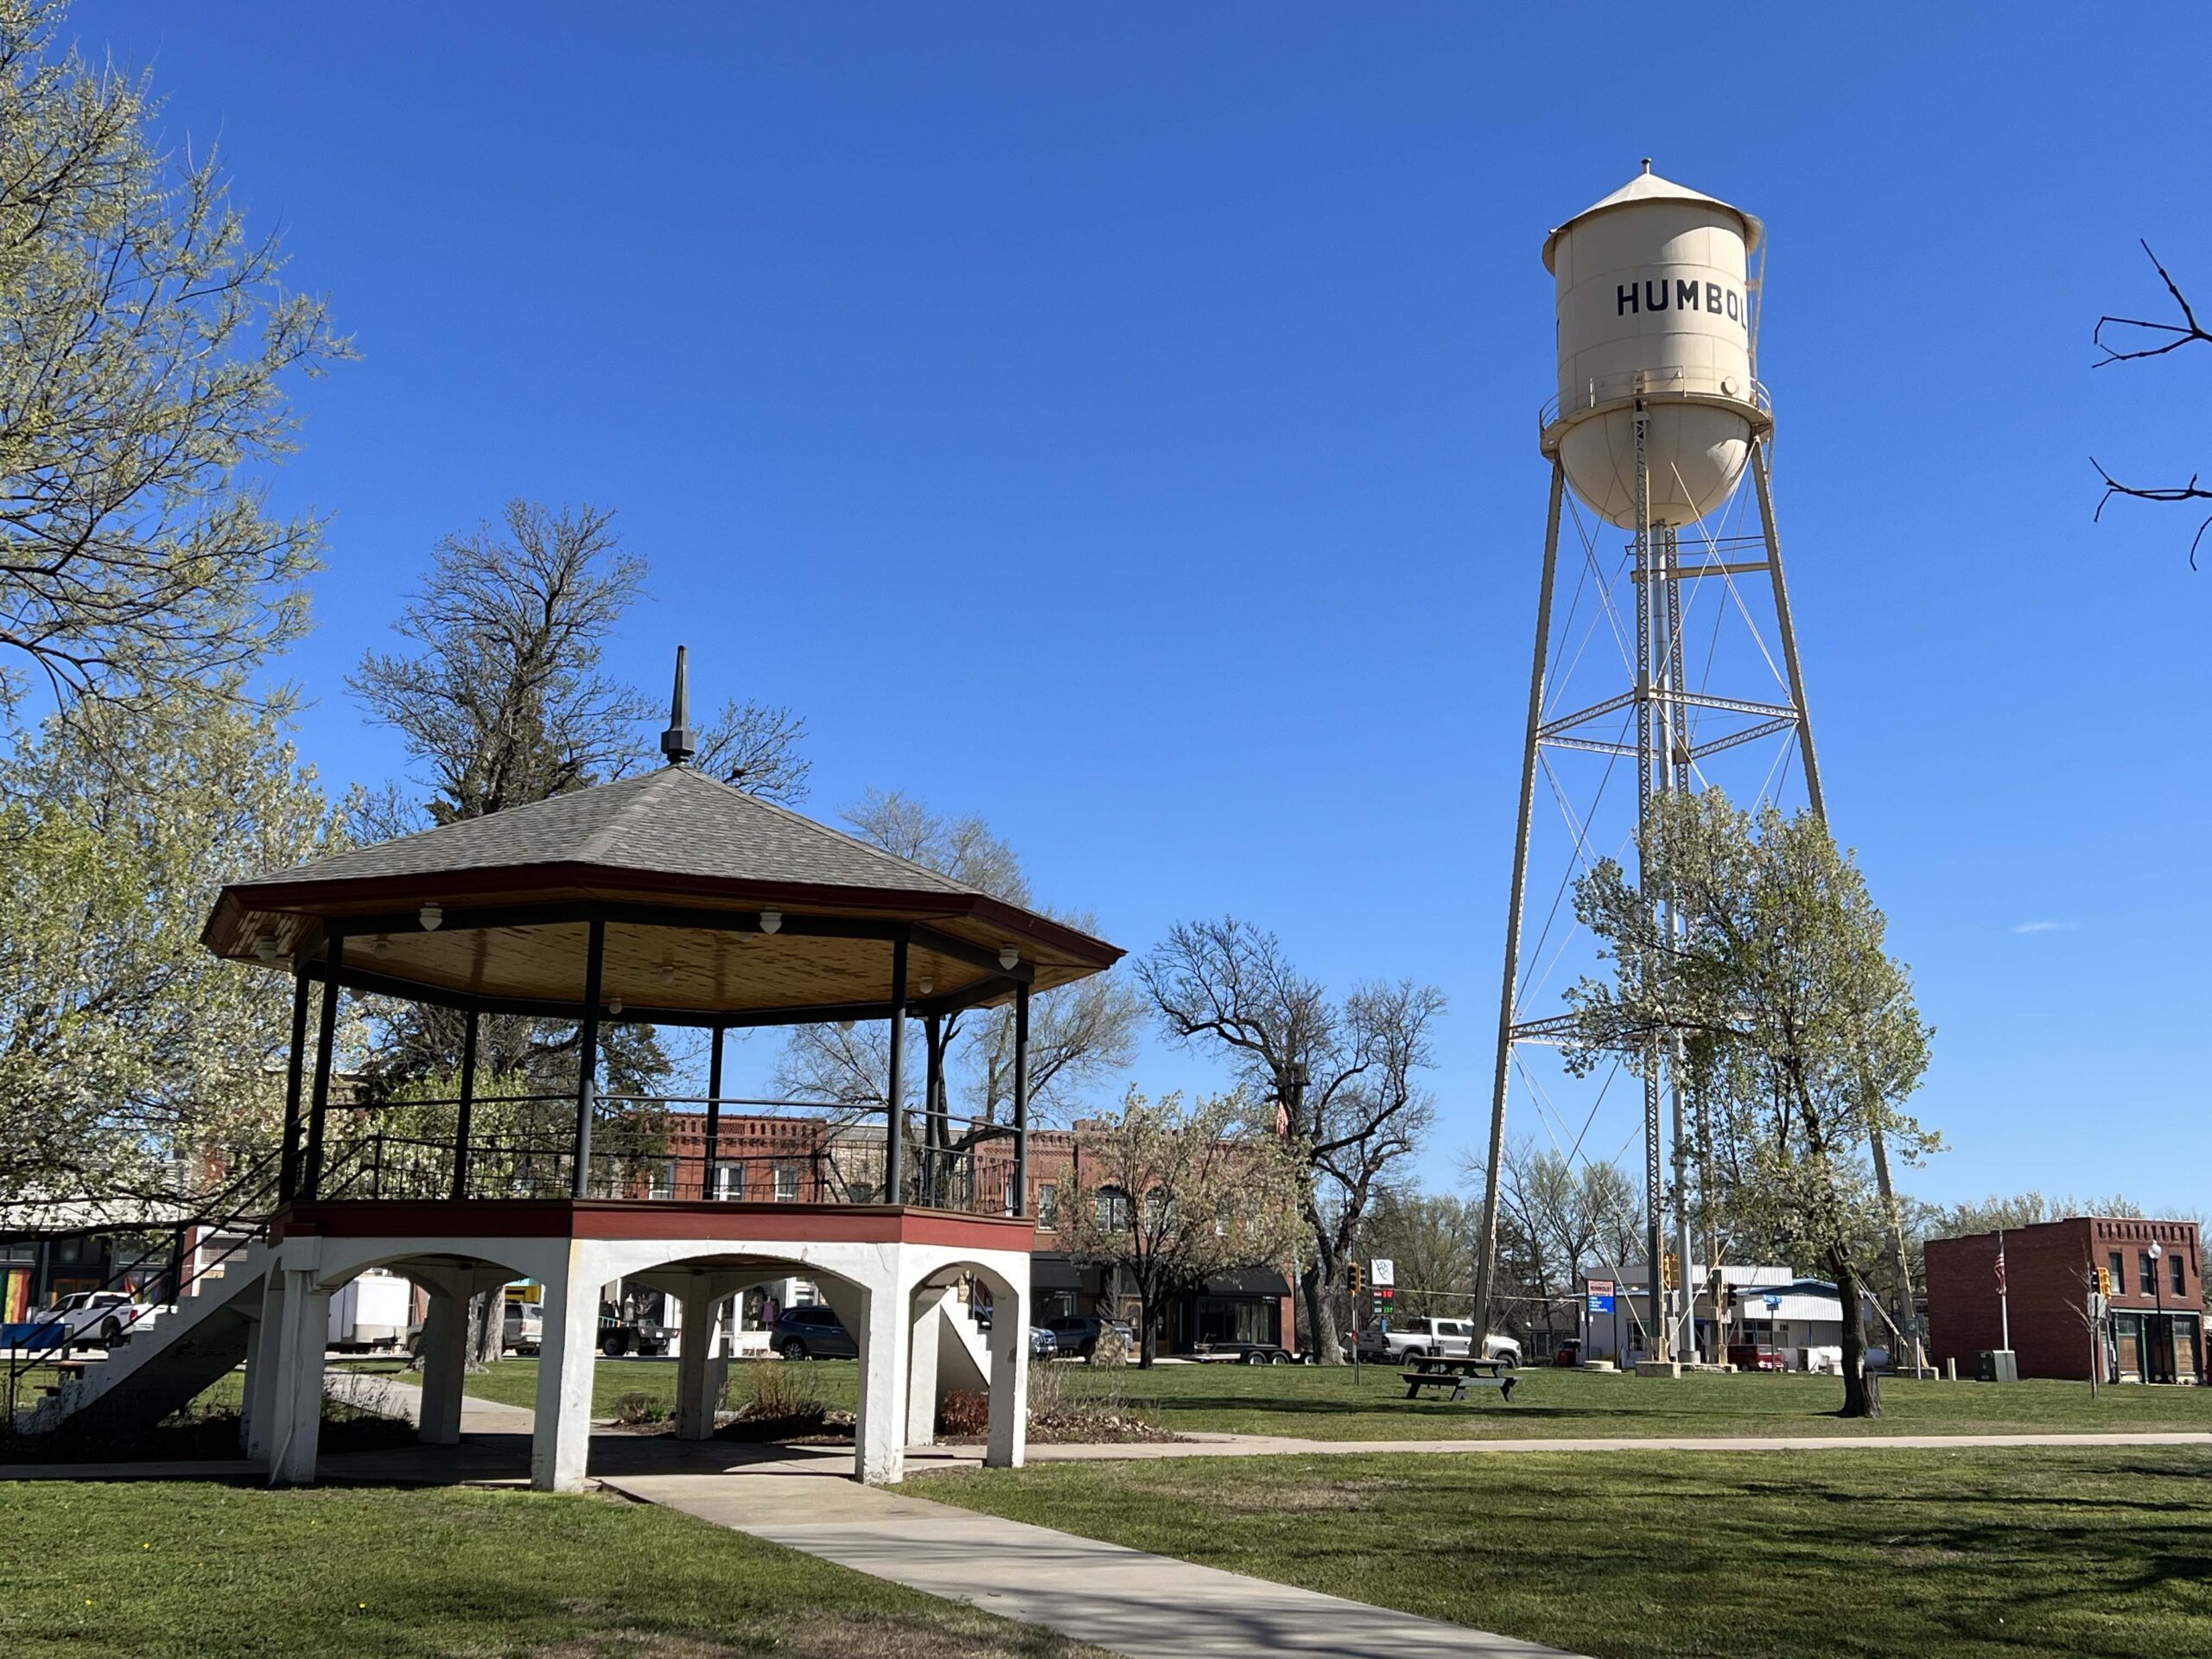 Humboldt, Kansas town center featuring a historic gazebo and water tower.